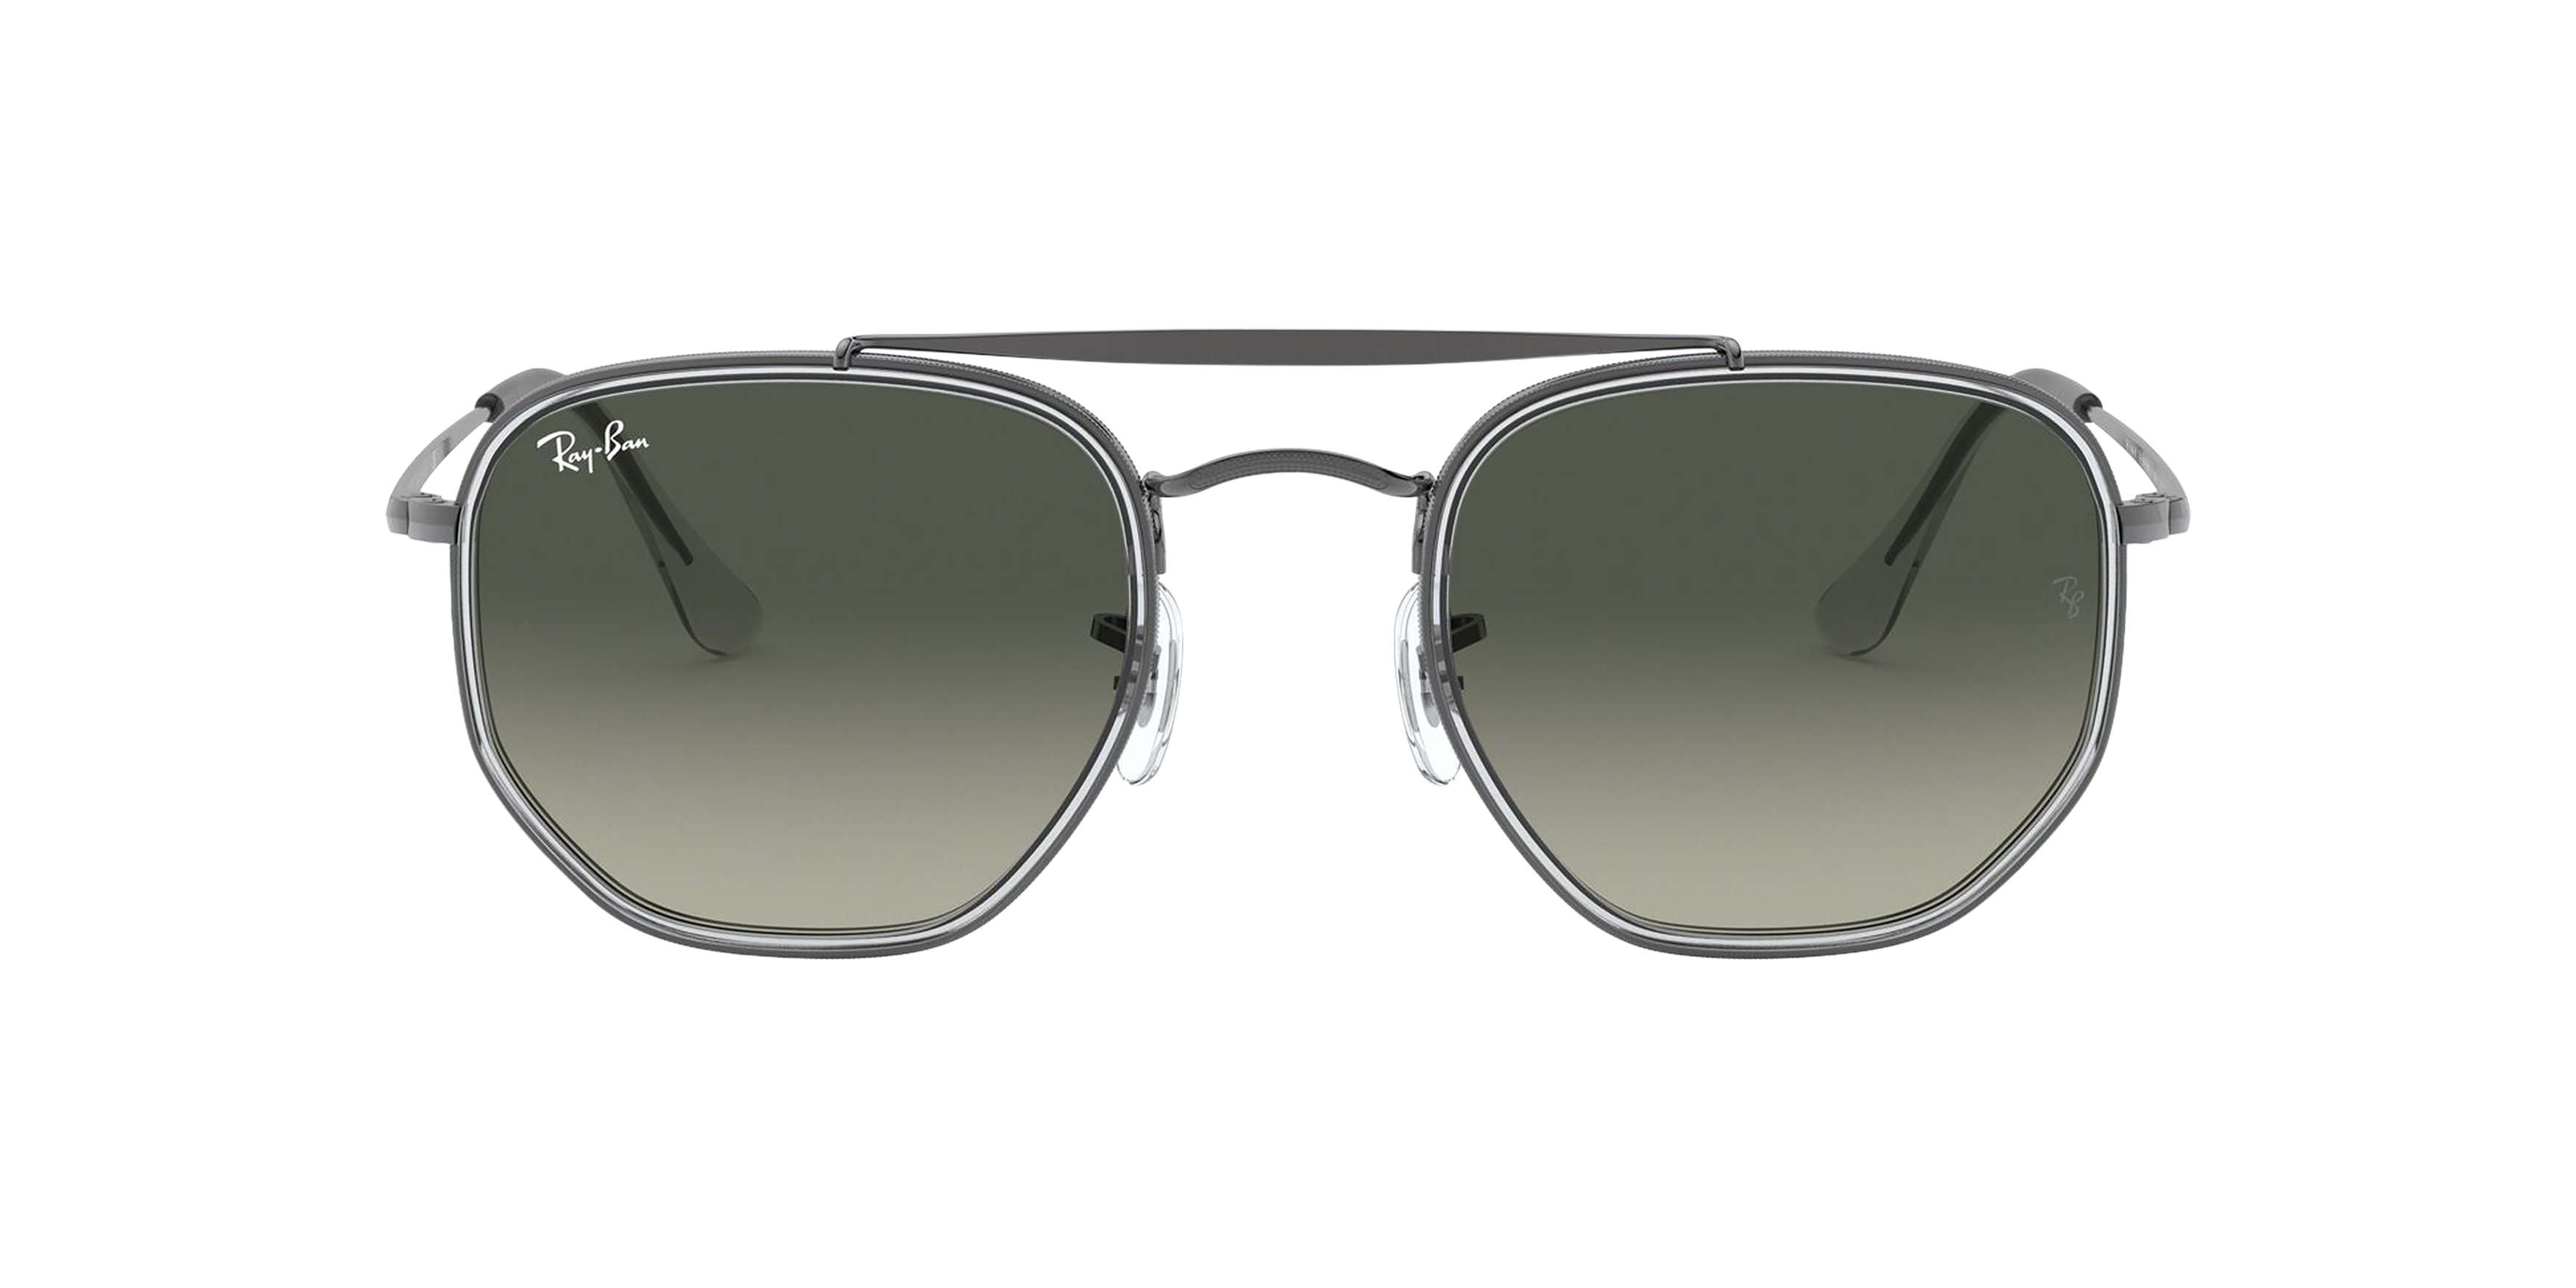 [products.image.front] RAY-BAN RB3648M 004/71